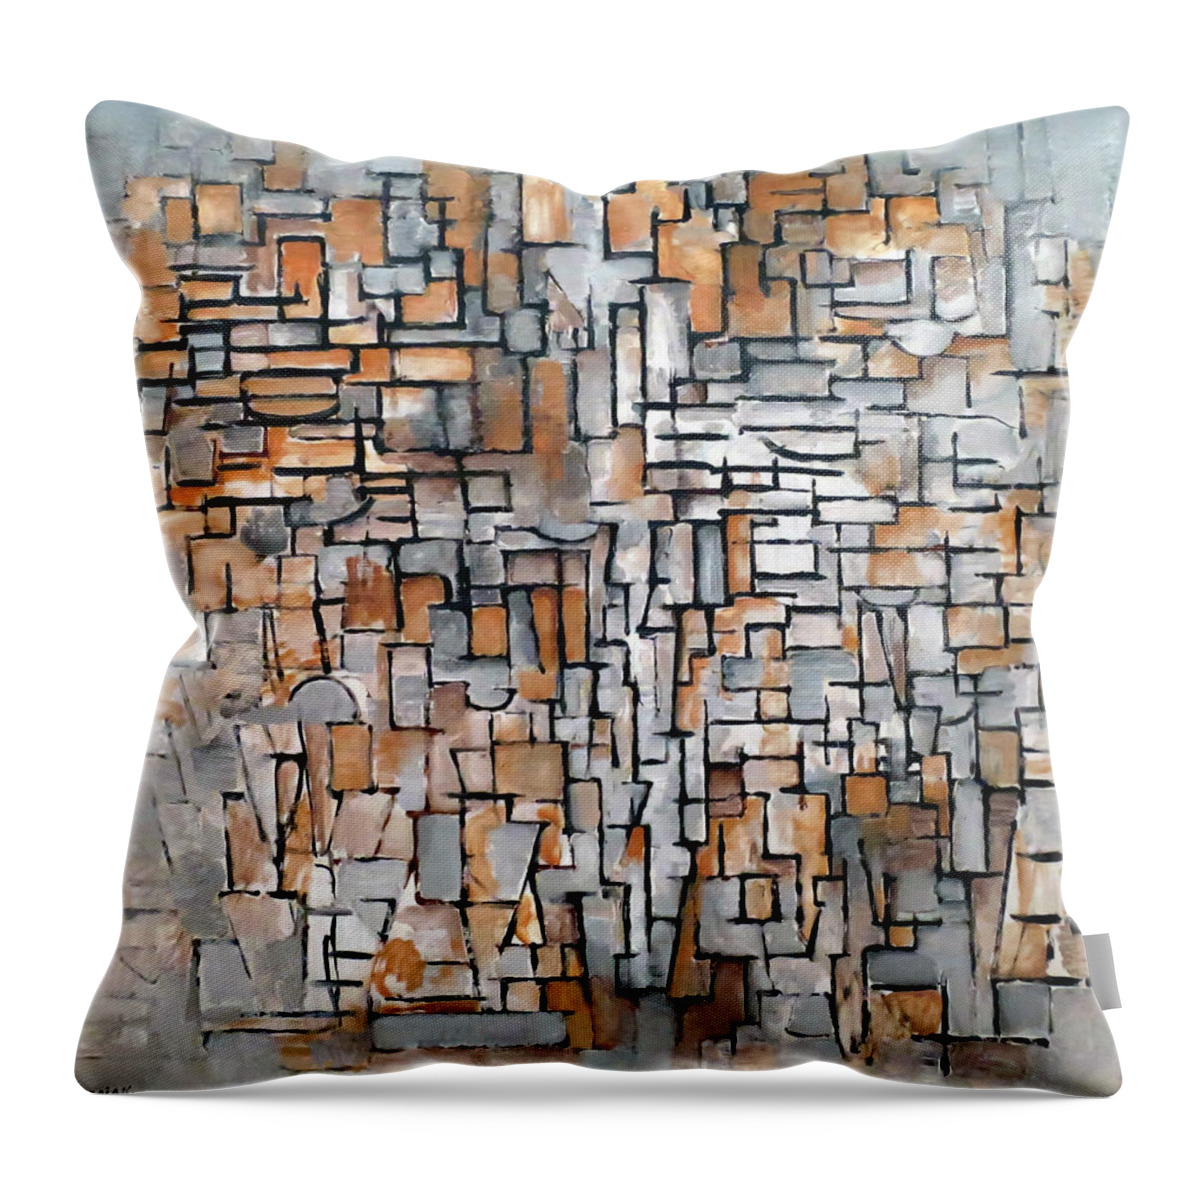 Piet Mondrian Throw Pillow featuring the painting Composition N. VII by Piet Mondrian